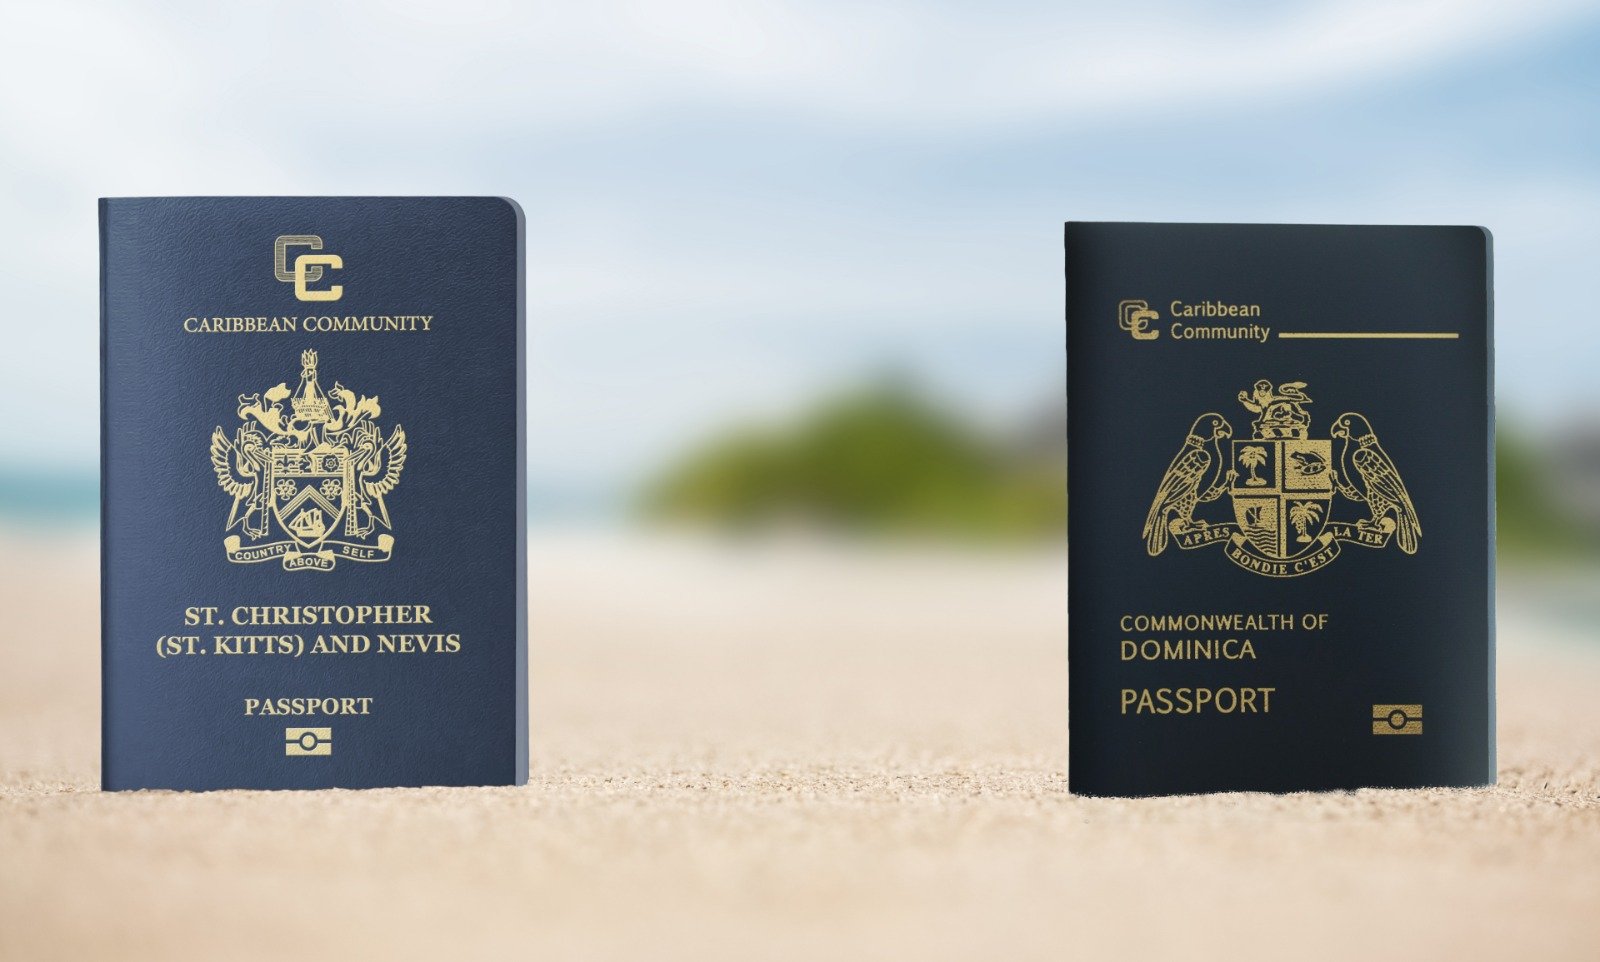 Dominica and St. Kitts and Nevis are now the #1 ranked citizenship by investment programs on the market